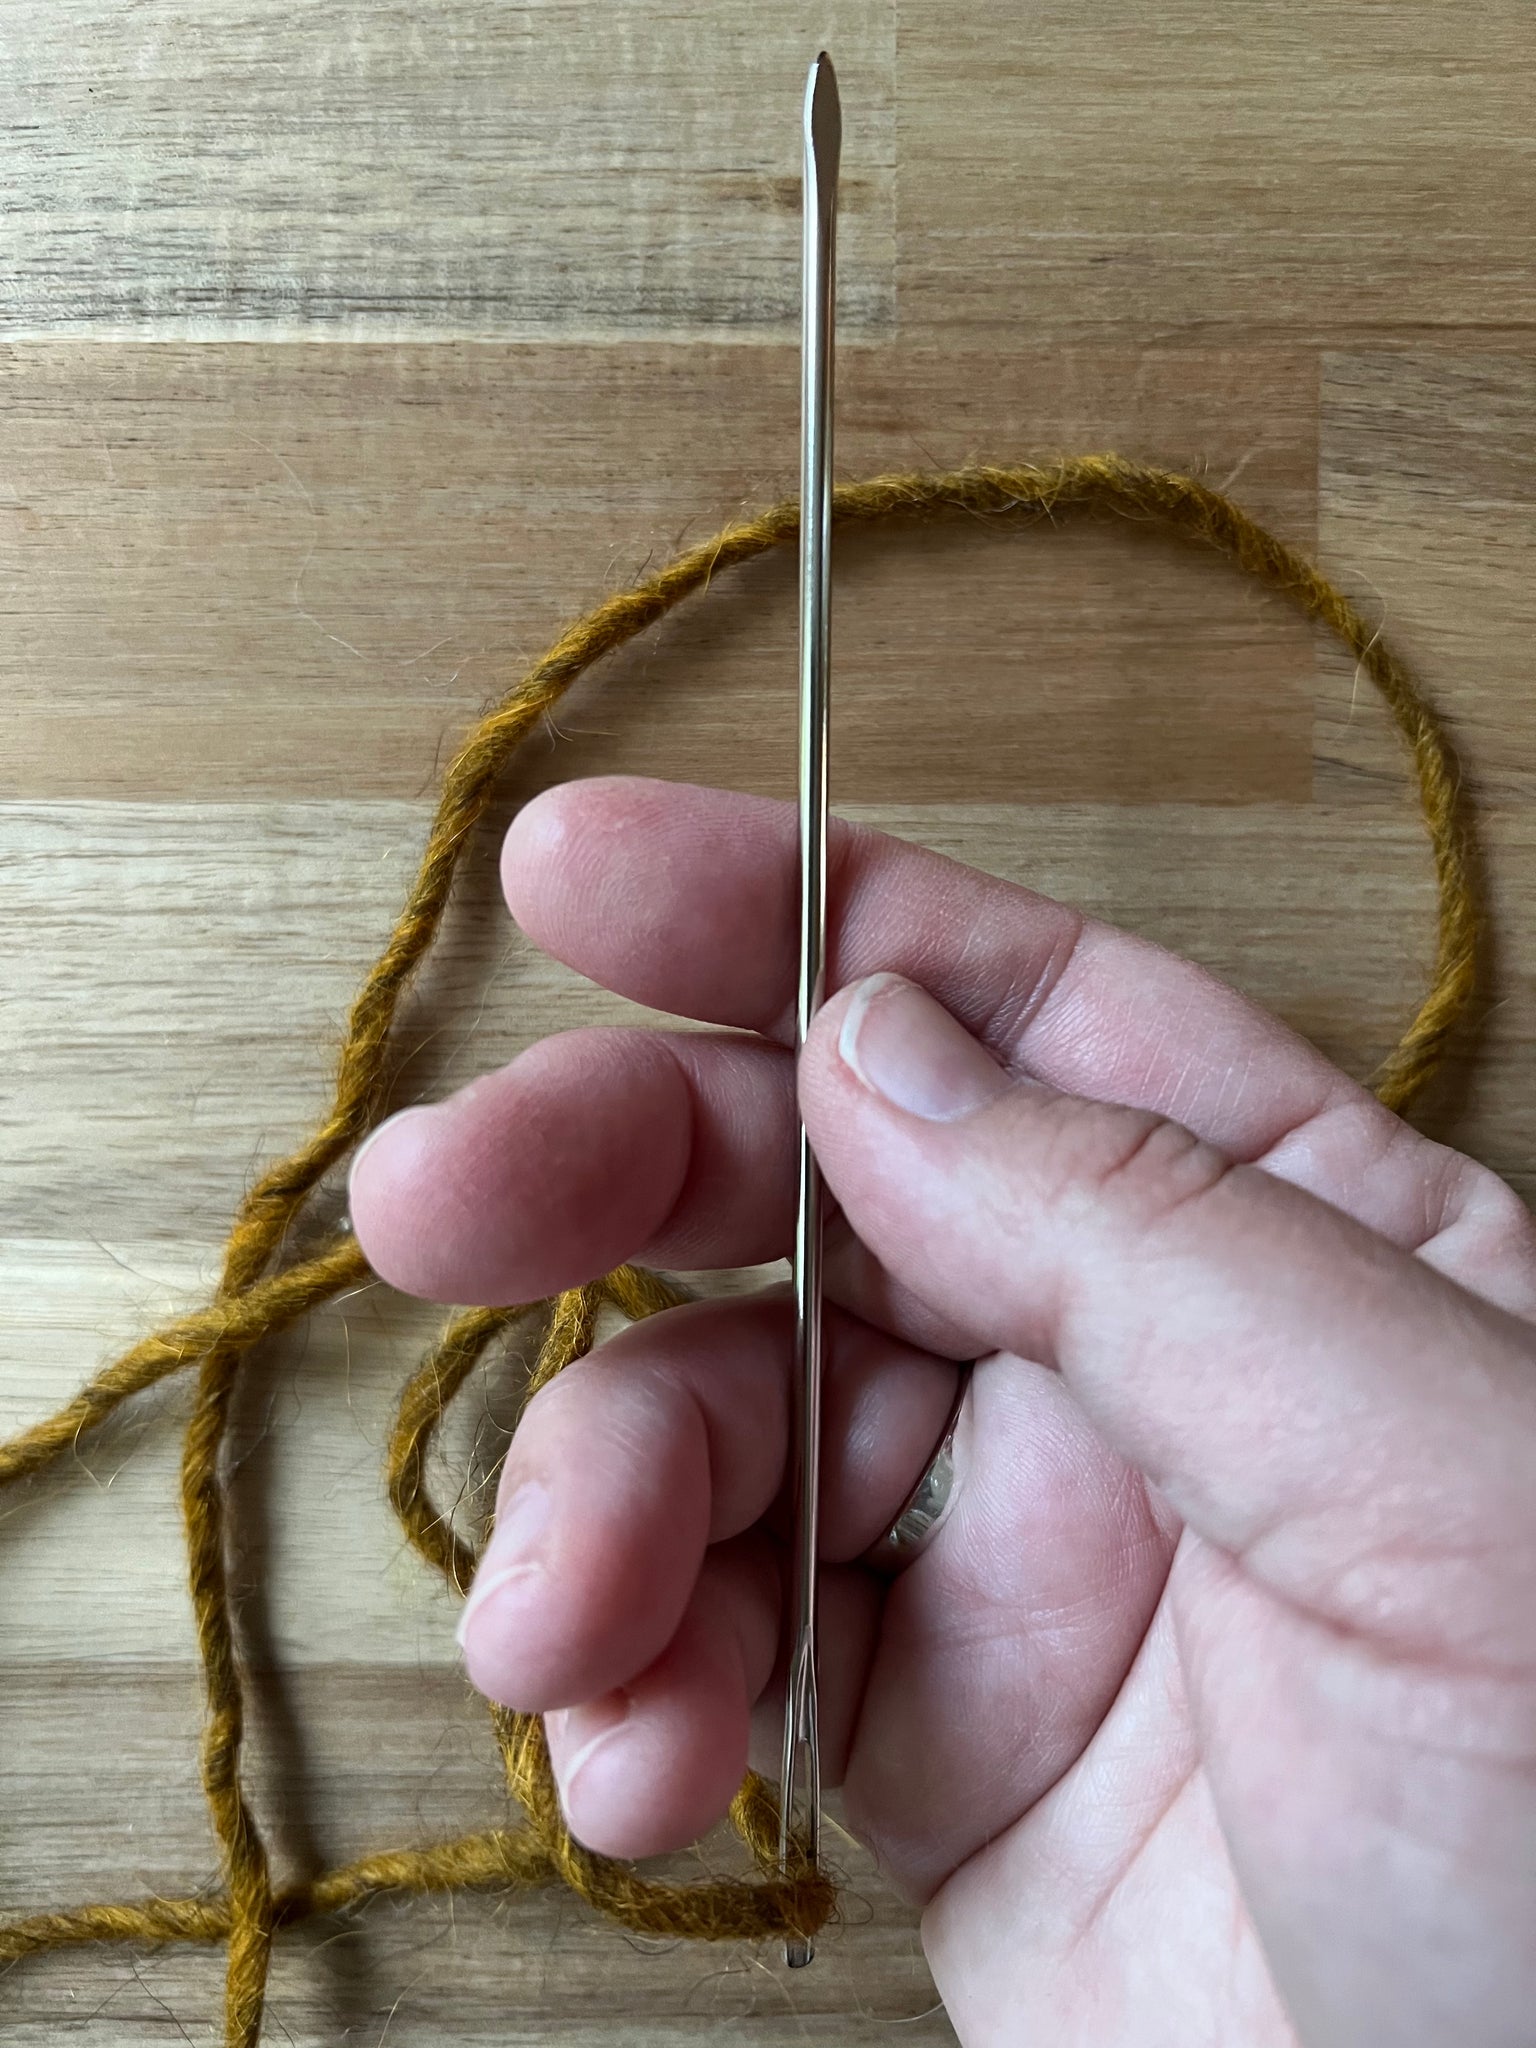 Weaving Needle Sets for Tapestry Loom Wooden Tapestry Needles